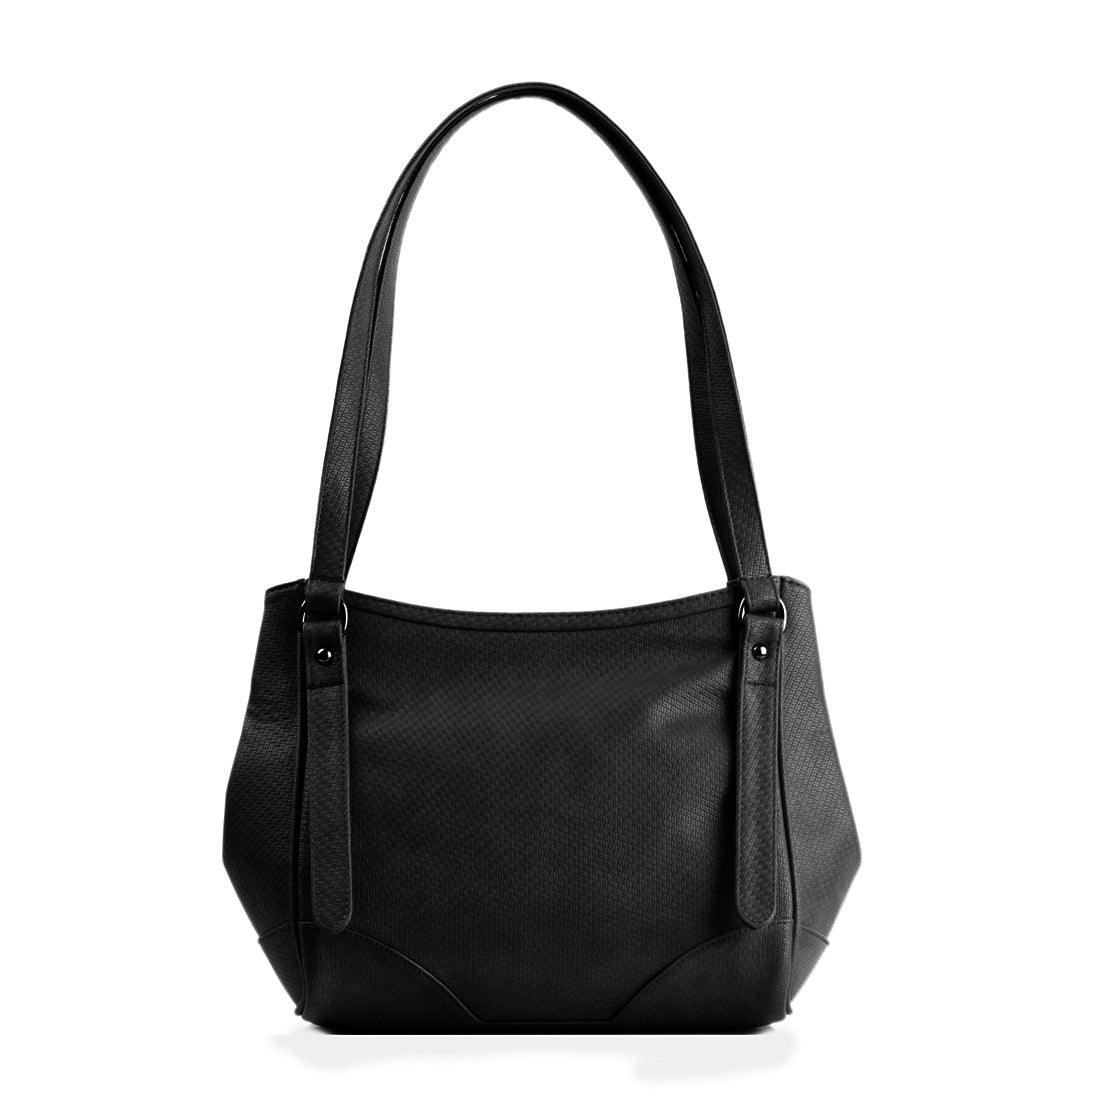 Black Leather Tote Bag Watercolor Gentle - CANVAEGYPT